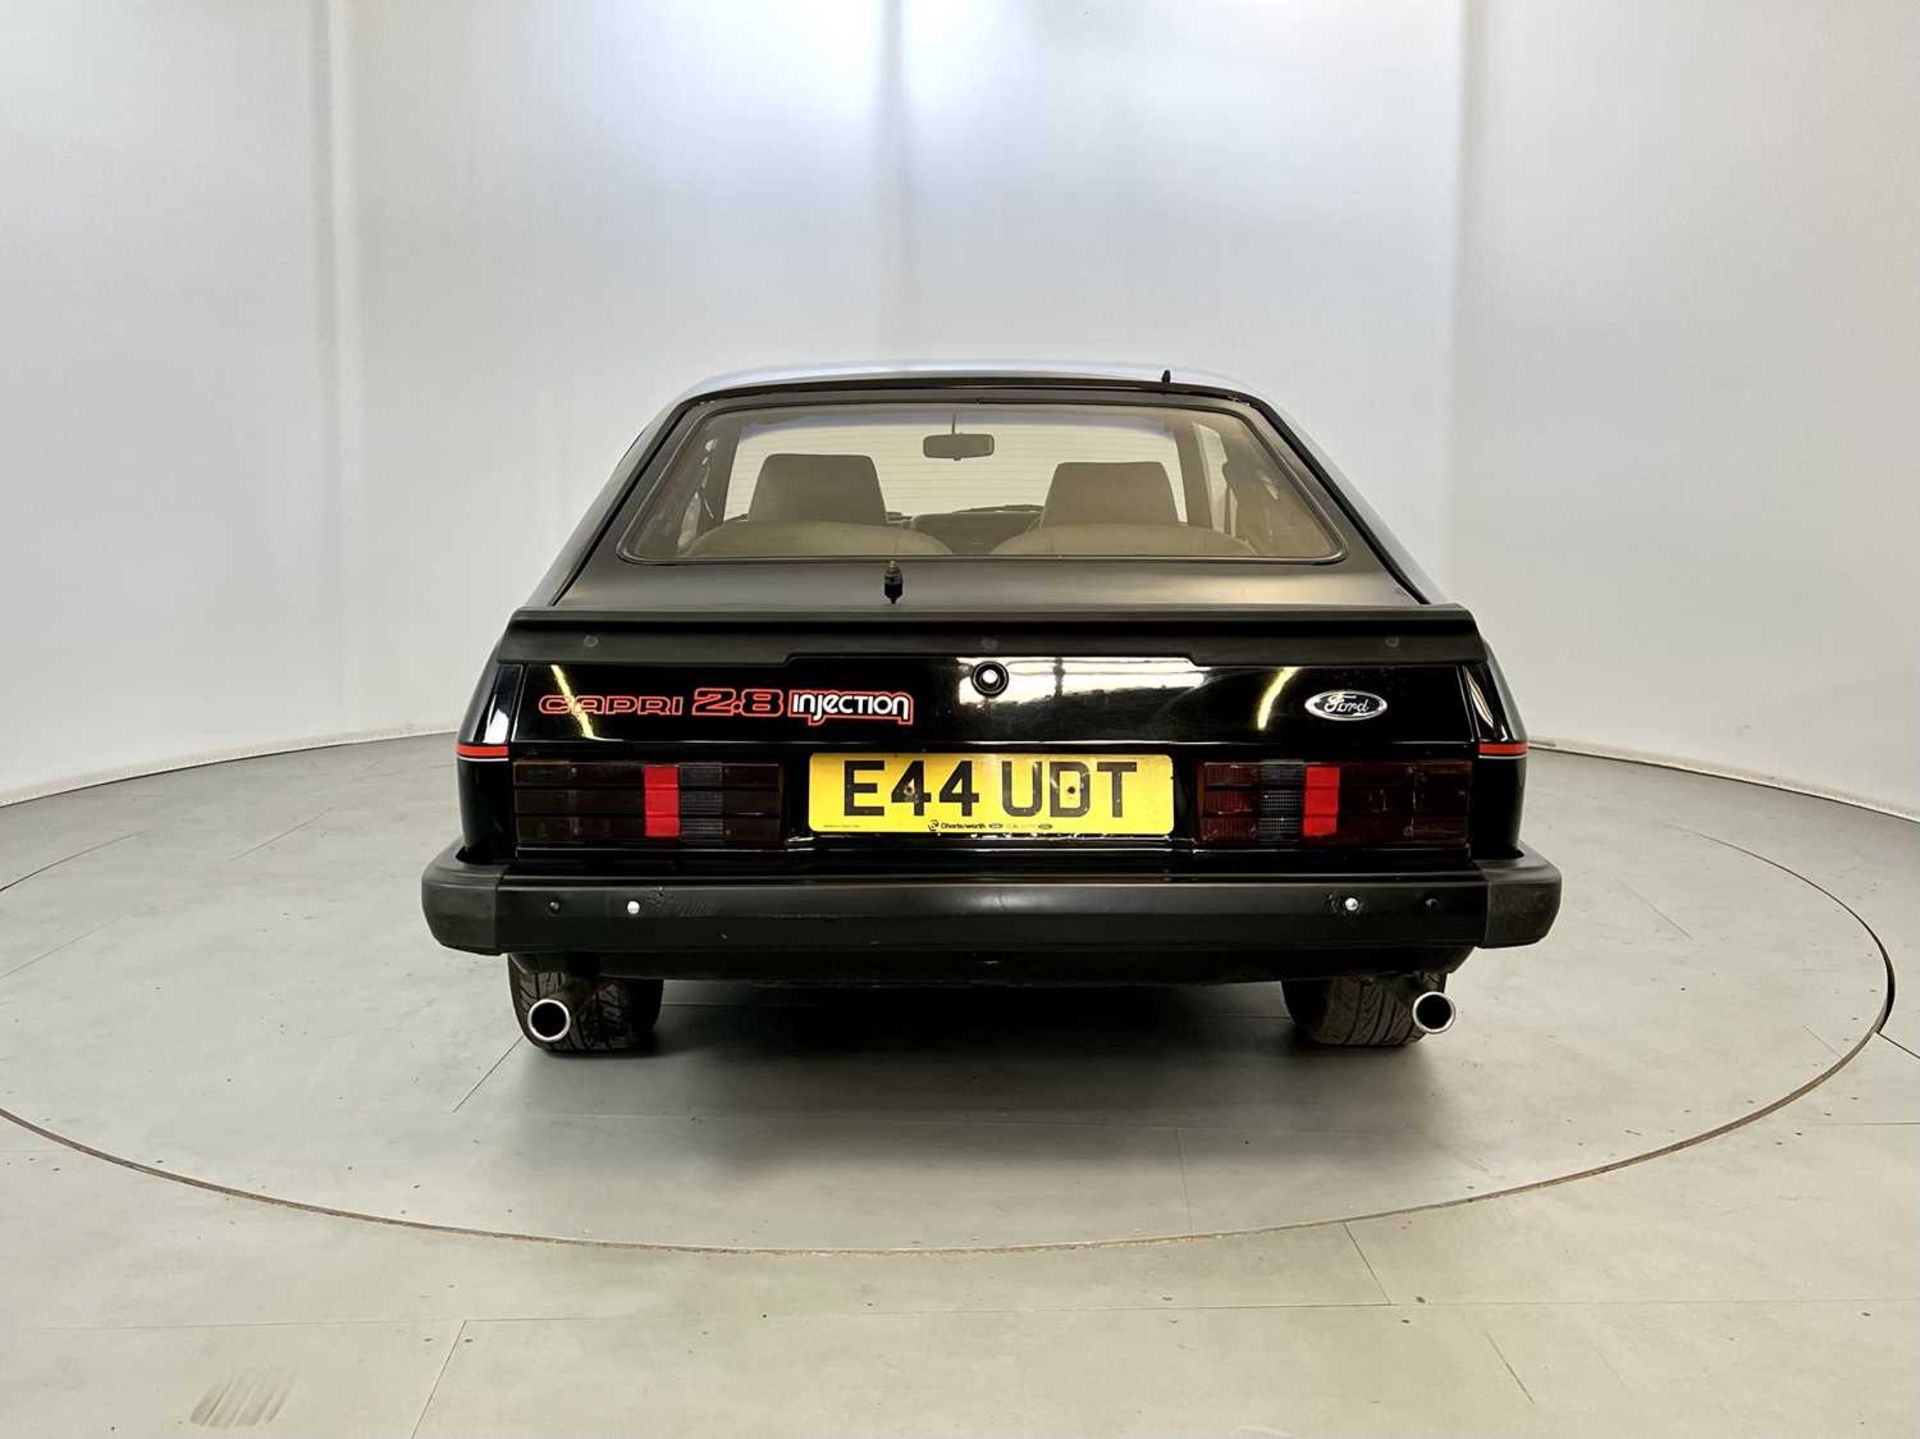 1987 Ford Capri 2.8 Injection - Image 8 of 28